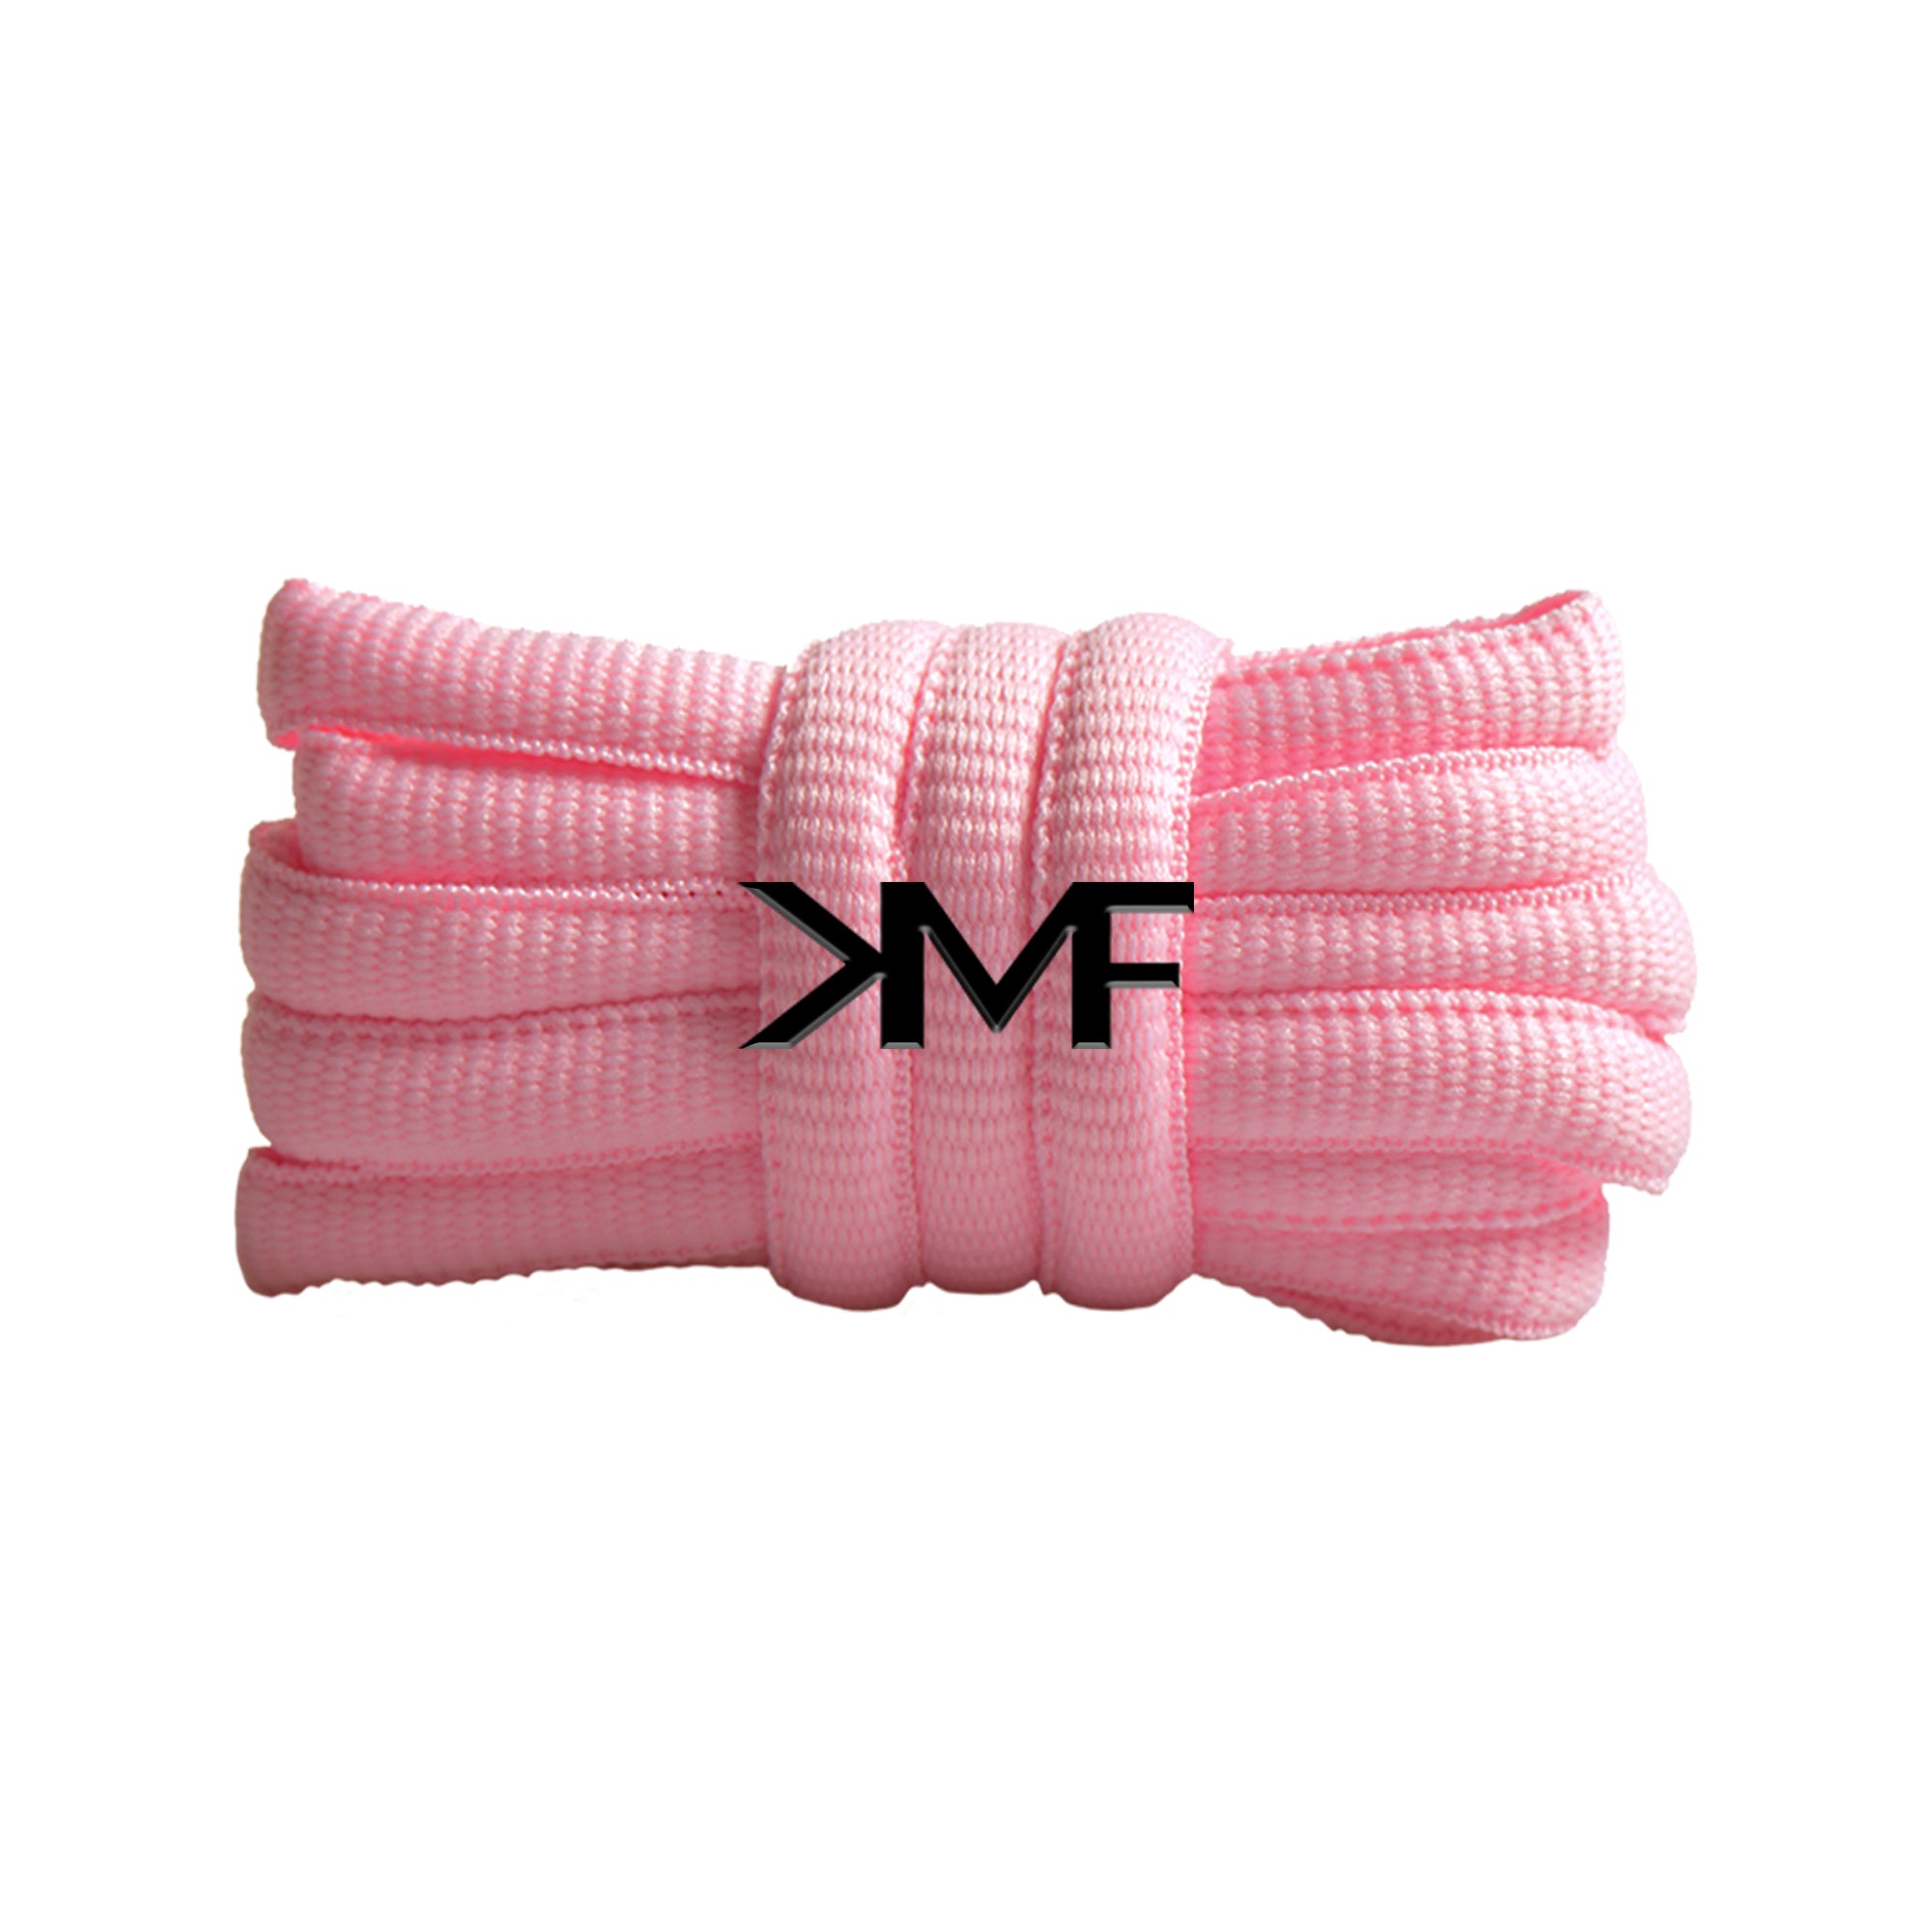 SB Dunk Oval Shoelaces (Pink)